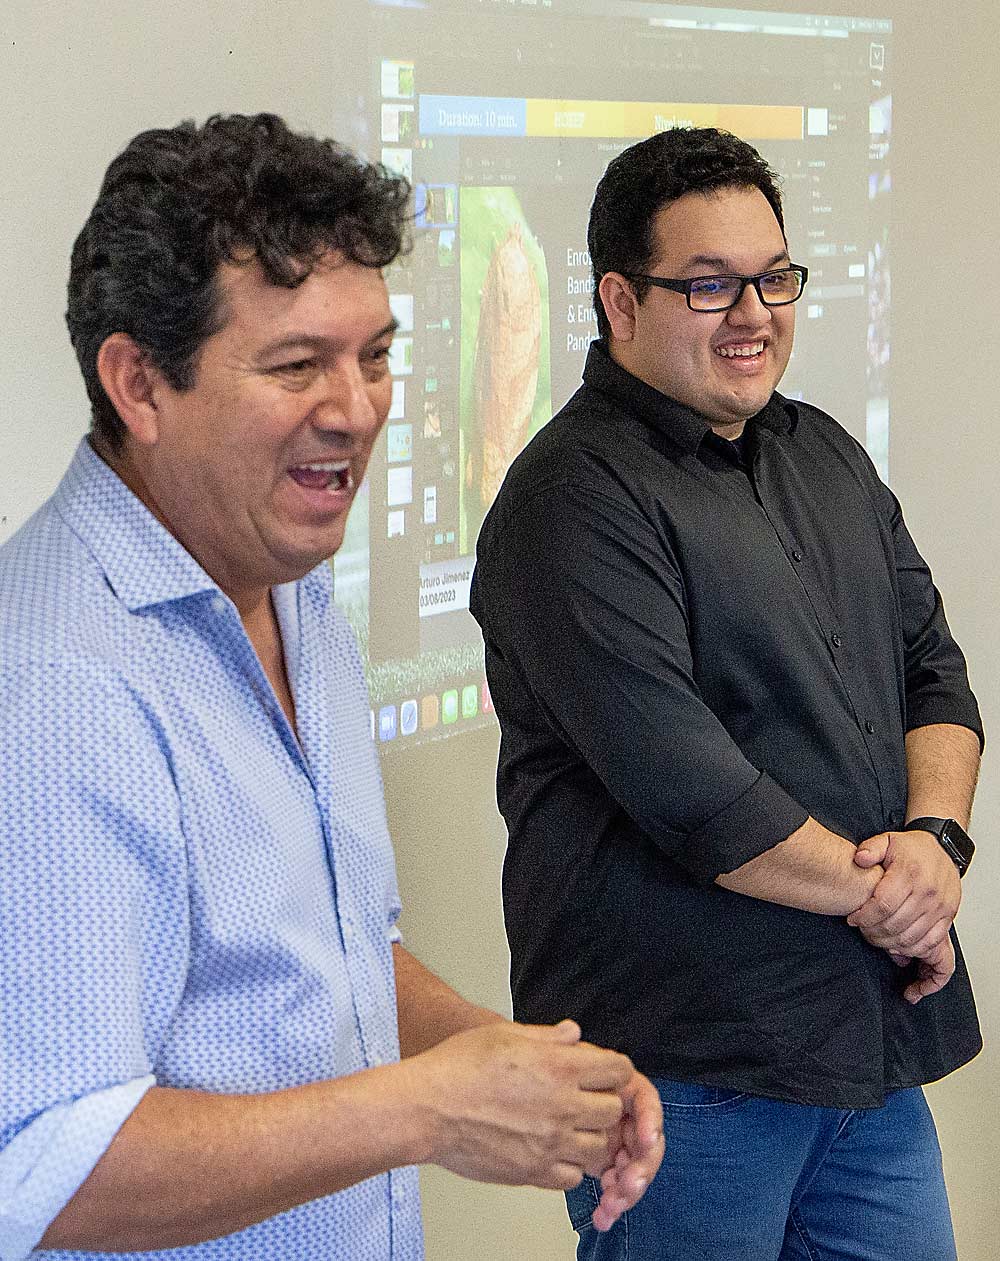 Francisco Sarmiento Sr., left, has been with the Hispanic Orchard Employee Education Program, or HOEEP, for 24 years and is now the faculty lead. At right is his son, Francisco “Frank” Sarmiento Jr., an instructor who started in November 2021. The course requires them to co-teach. (Ross Courtney/Good Fruit Grower)